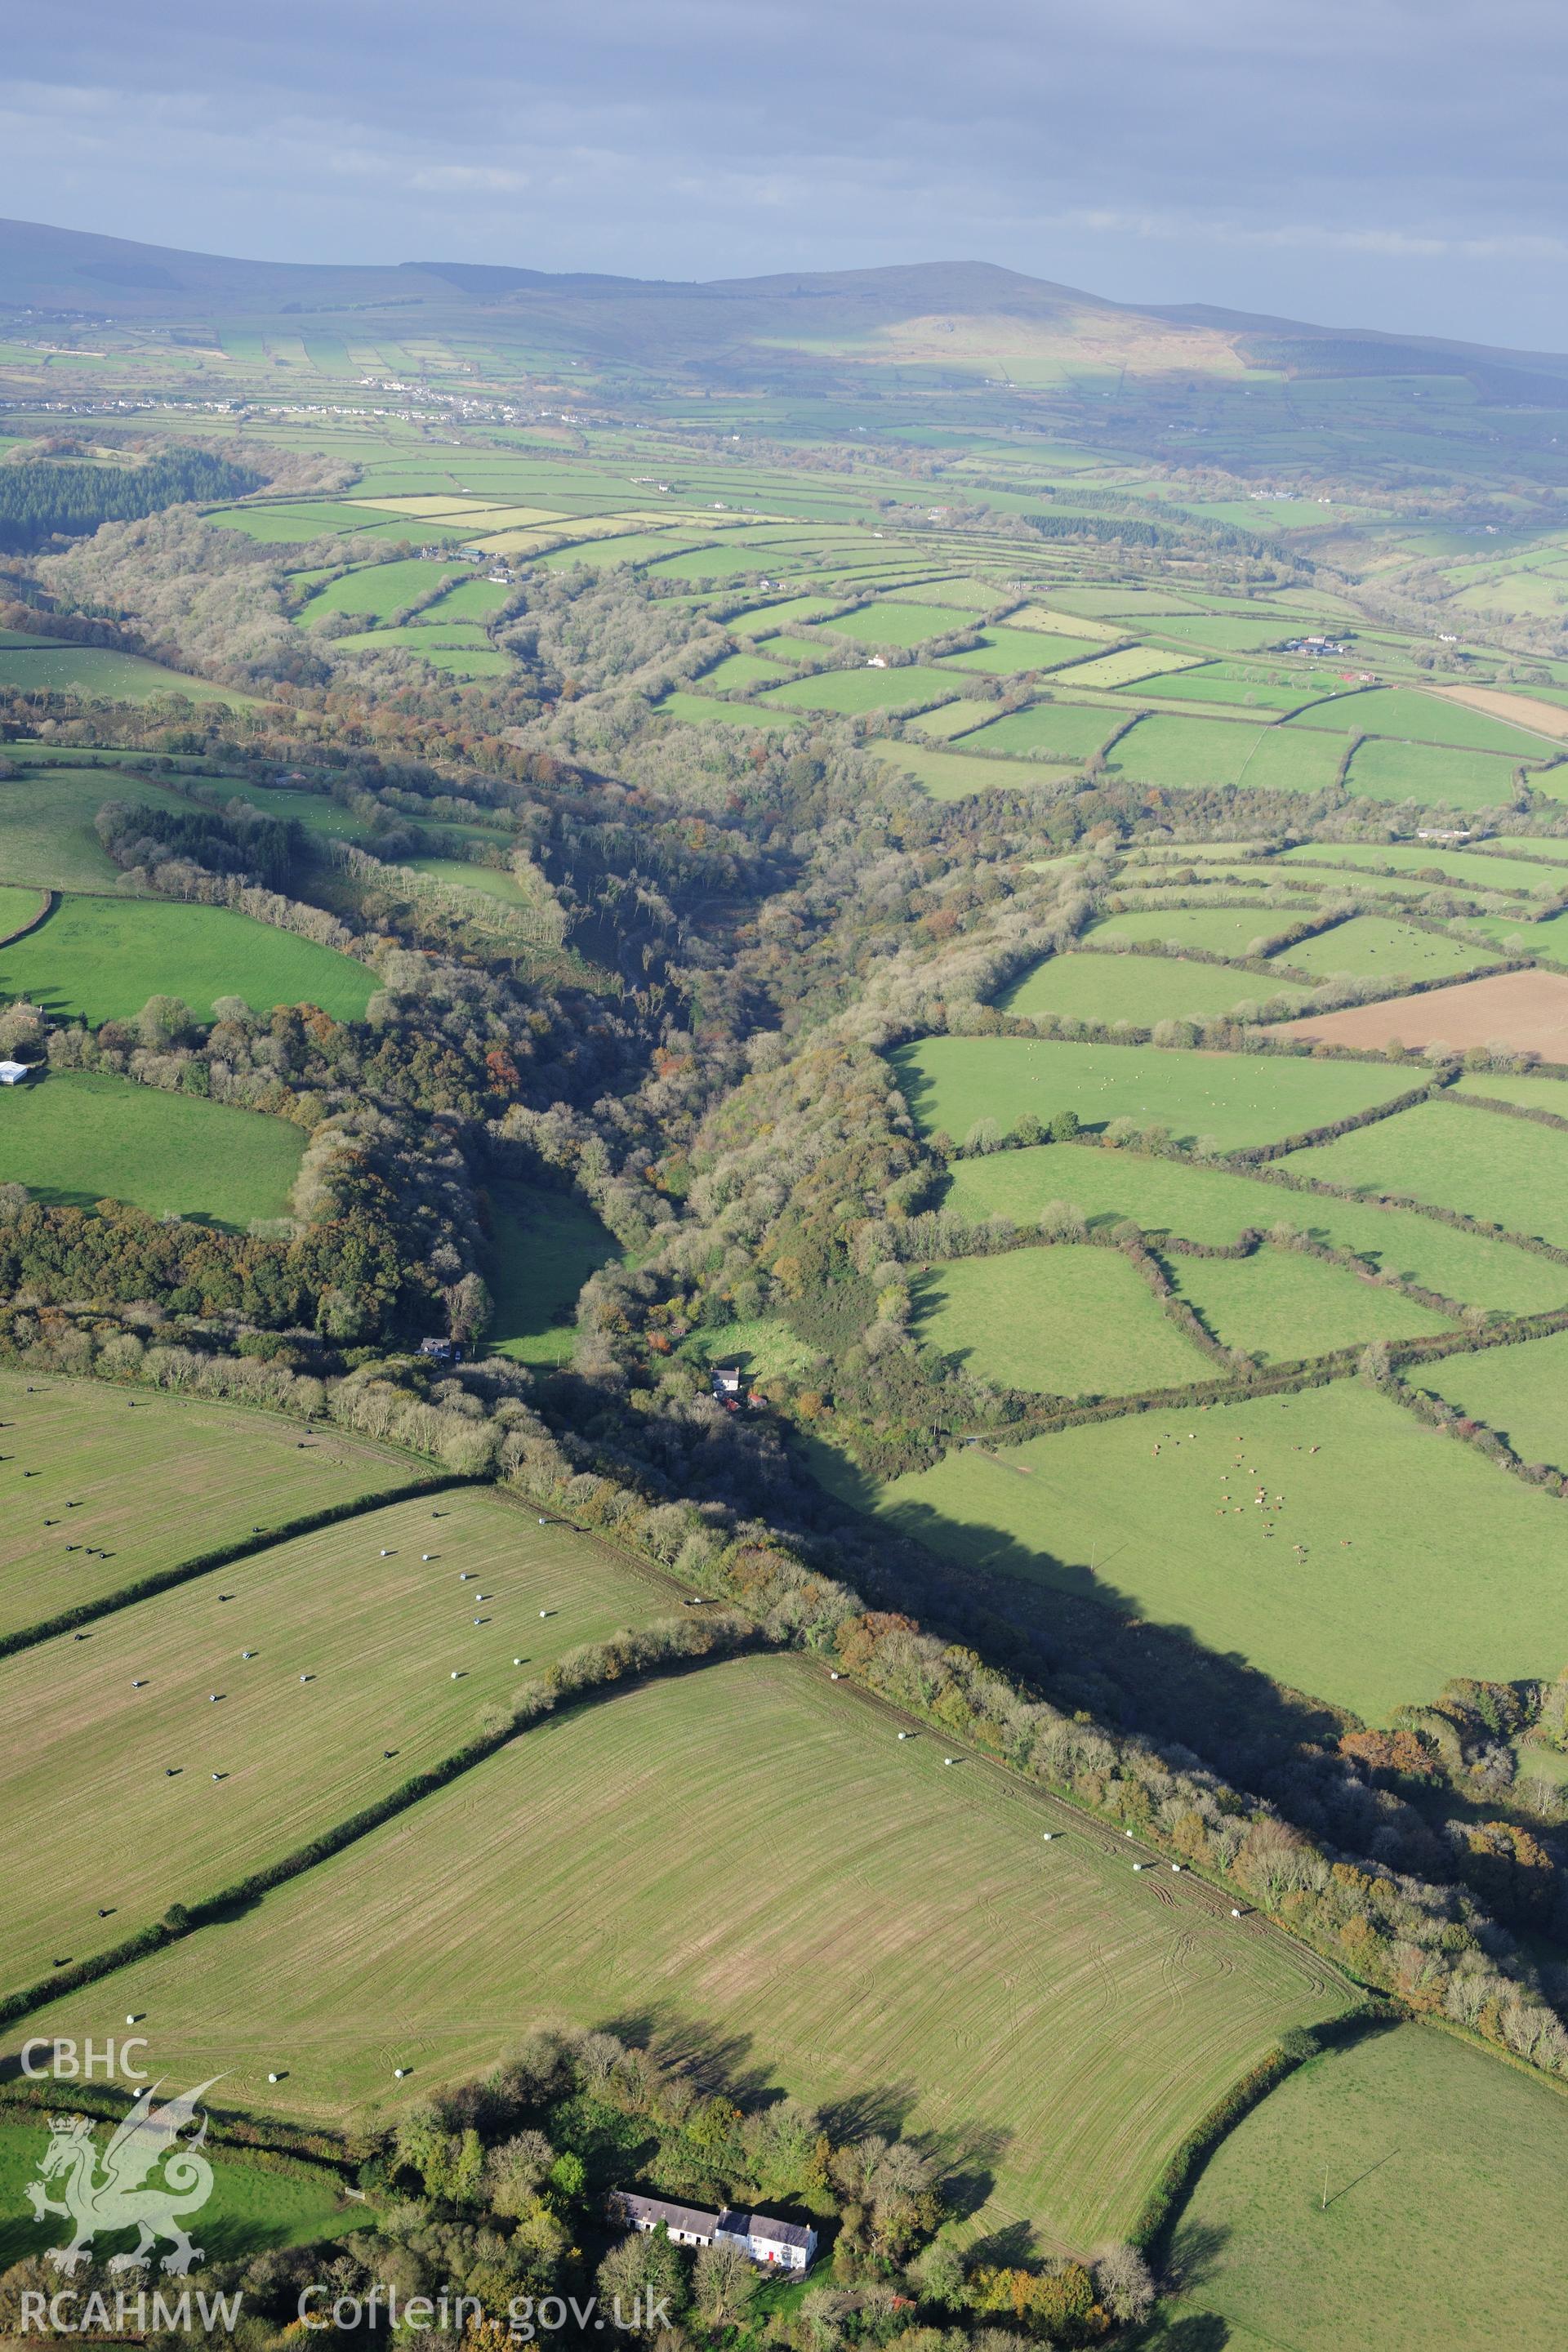 RCAHMW colour oblique photograph of  Landscape  Rhyd-afallen Valley. Taken by Toby Driver on 26/10/2012.